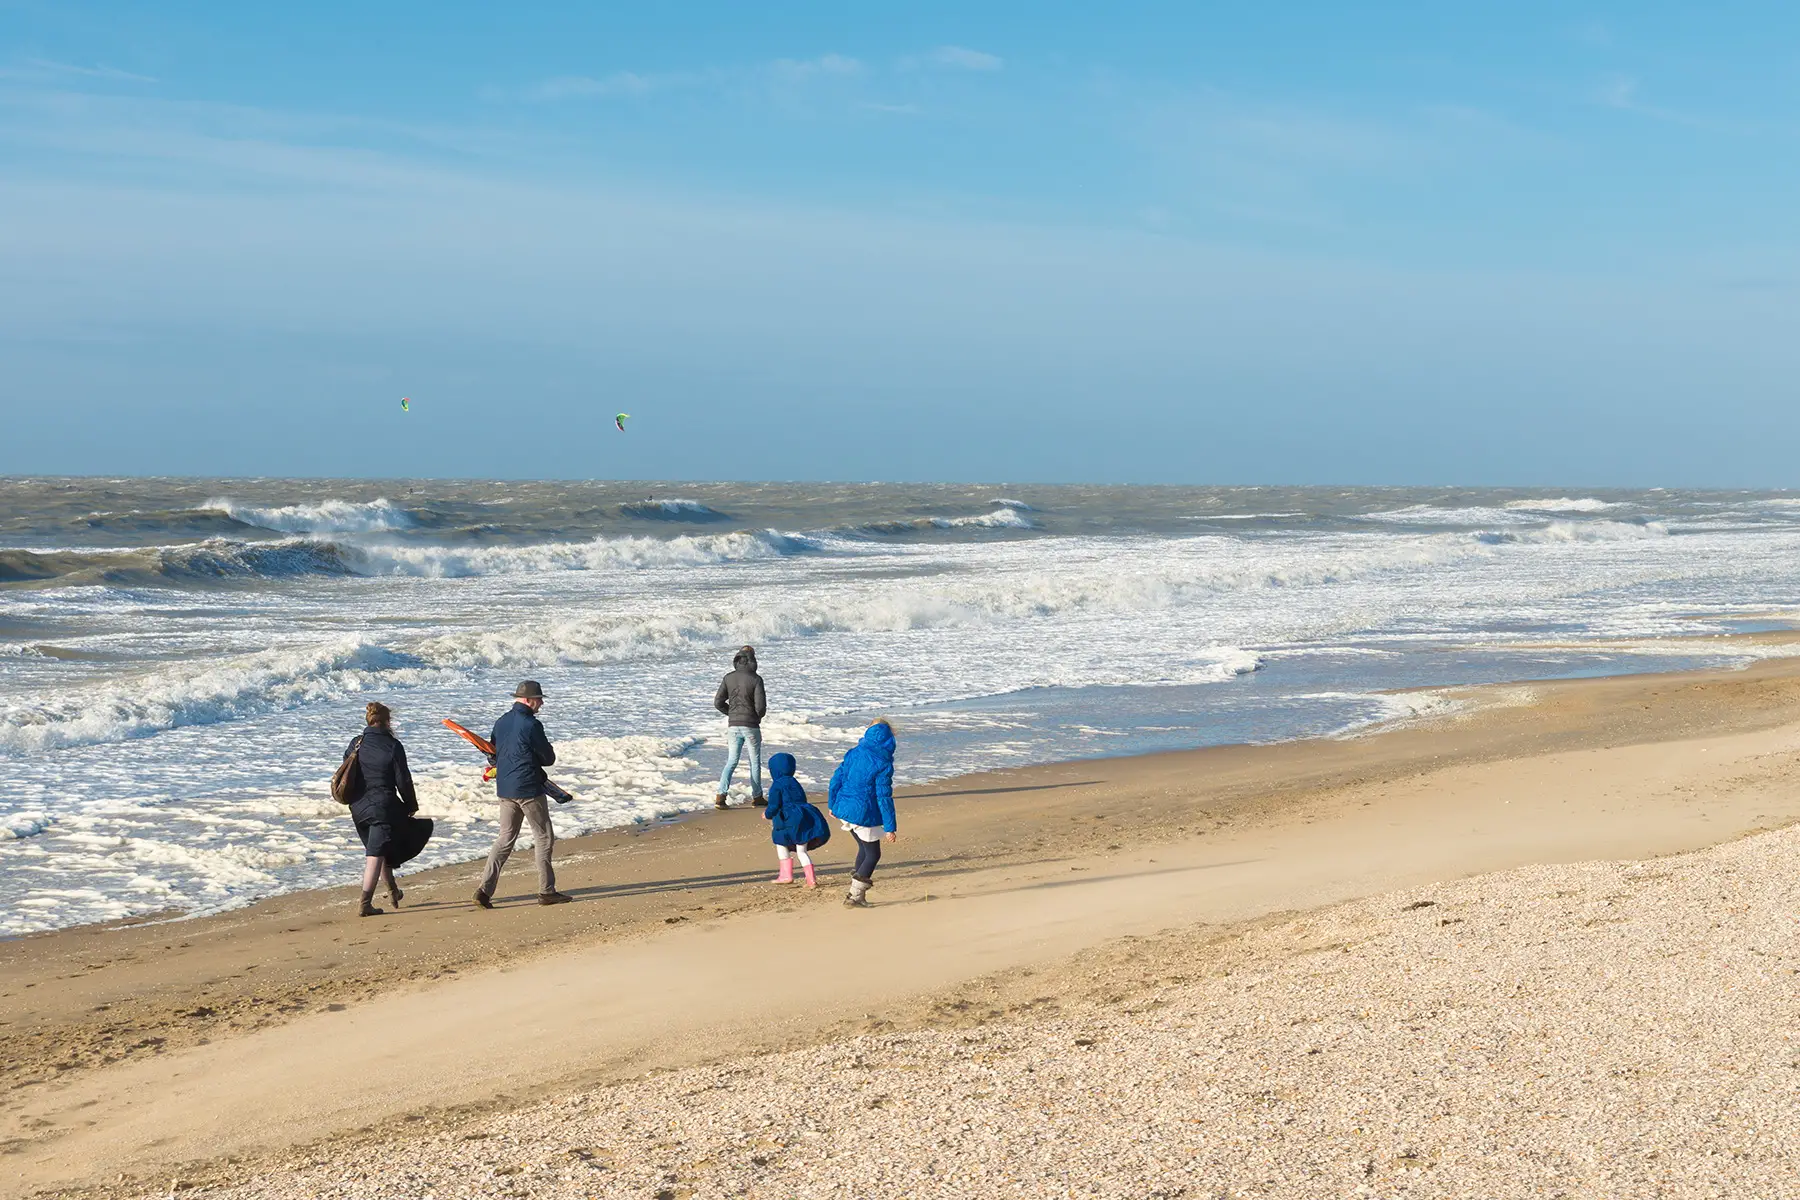 A family walking on the beach in The Hague